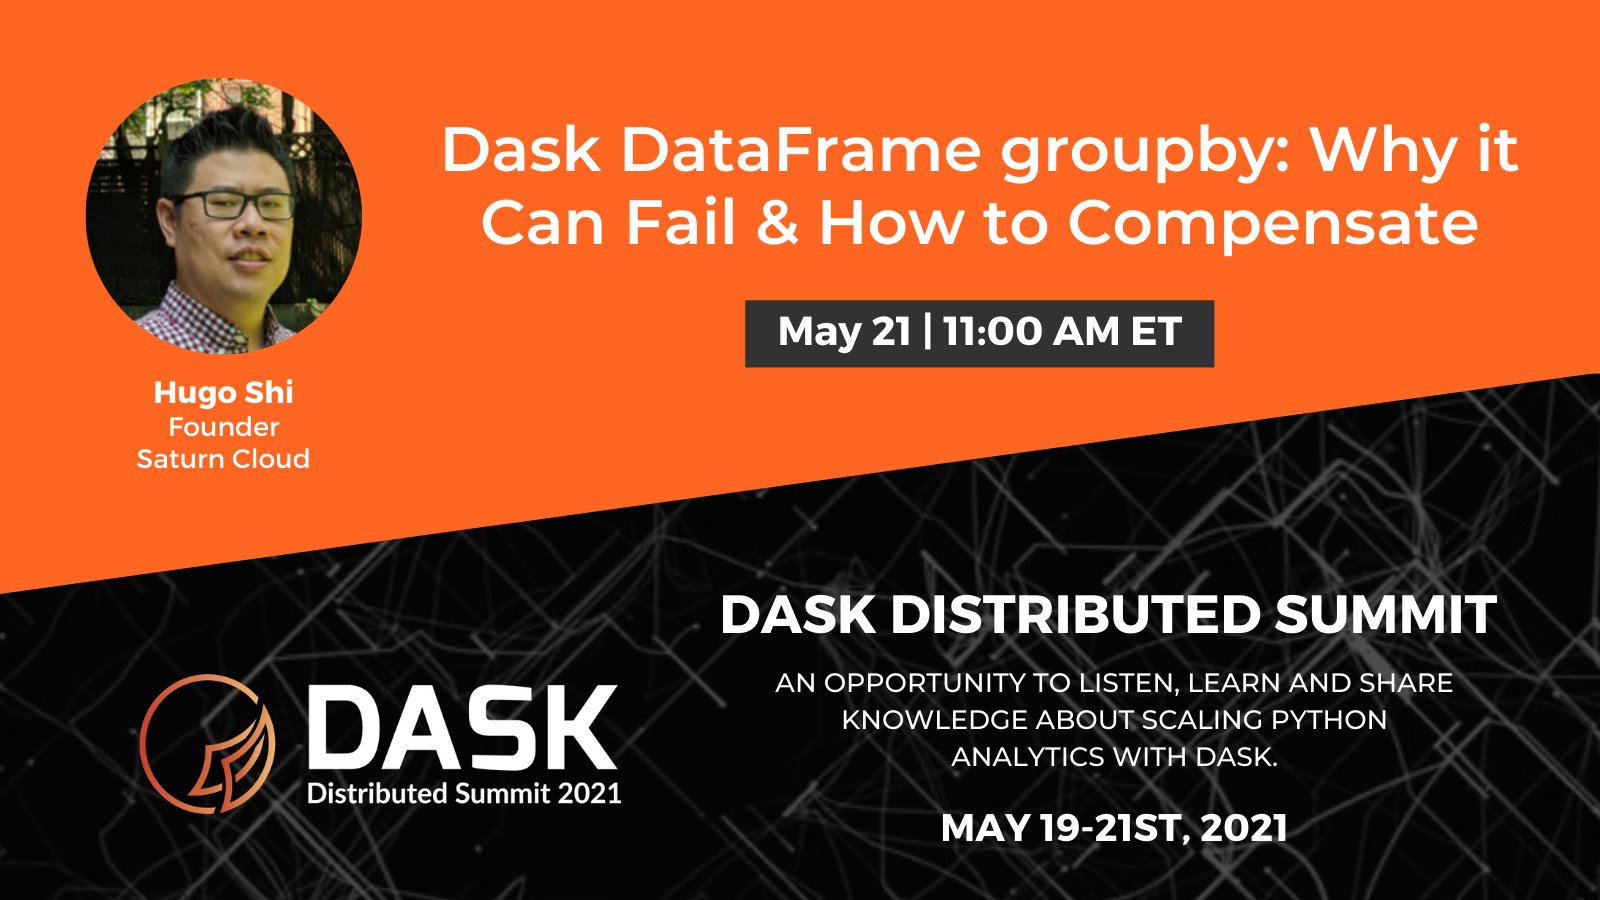 Featured Image for Dask DataFrame groupby. Why it can fail and how to compensate.